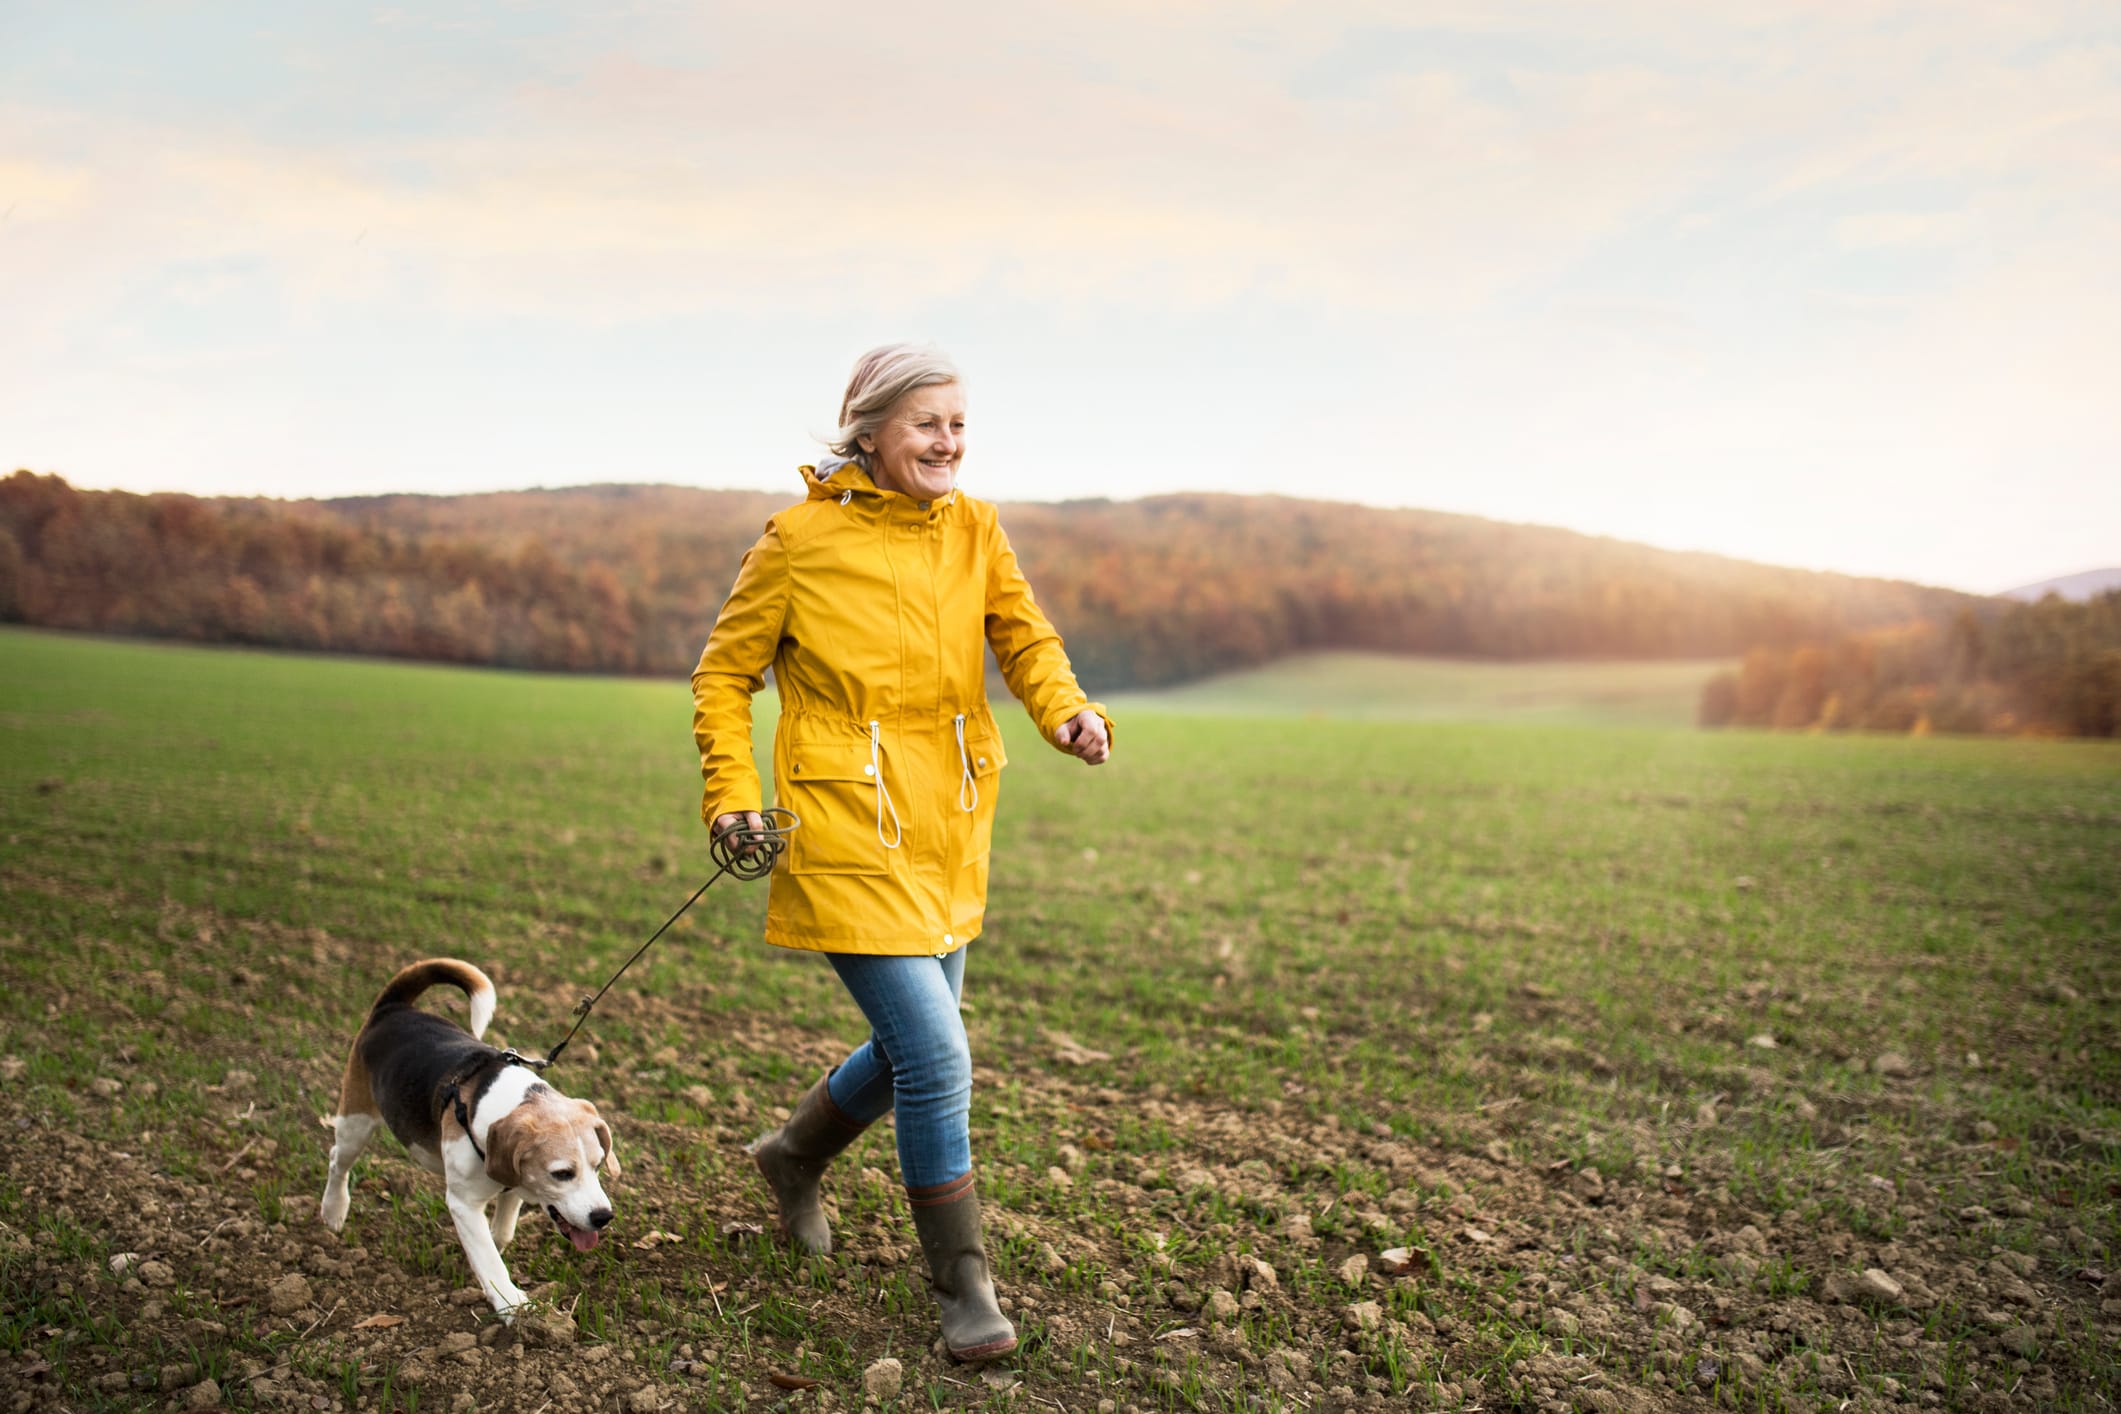 Joyful and financially confident woman taking her dog for a walk in a field